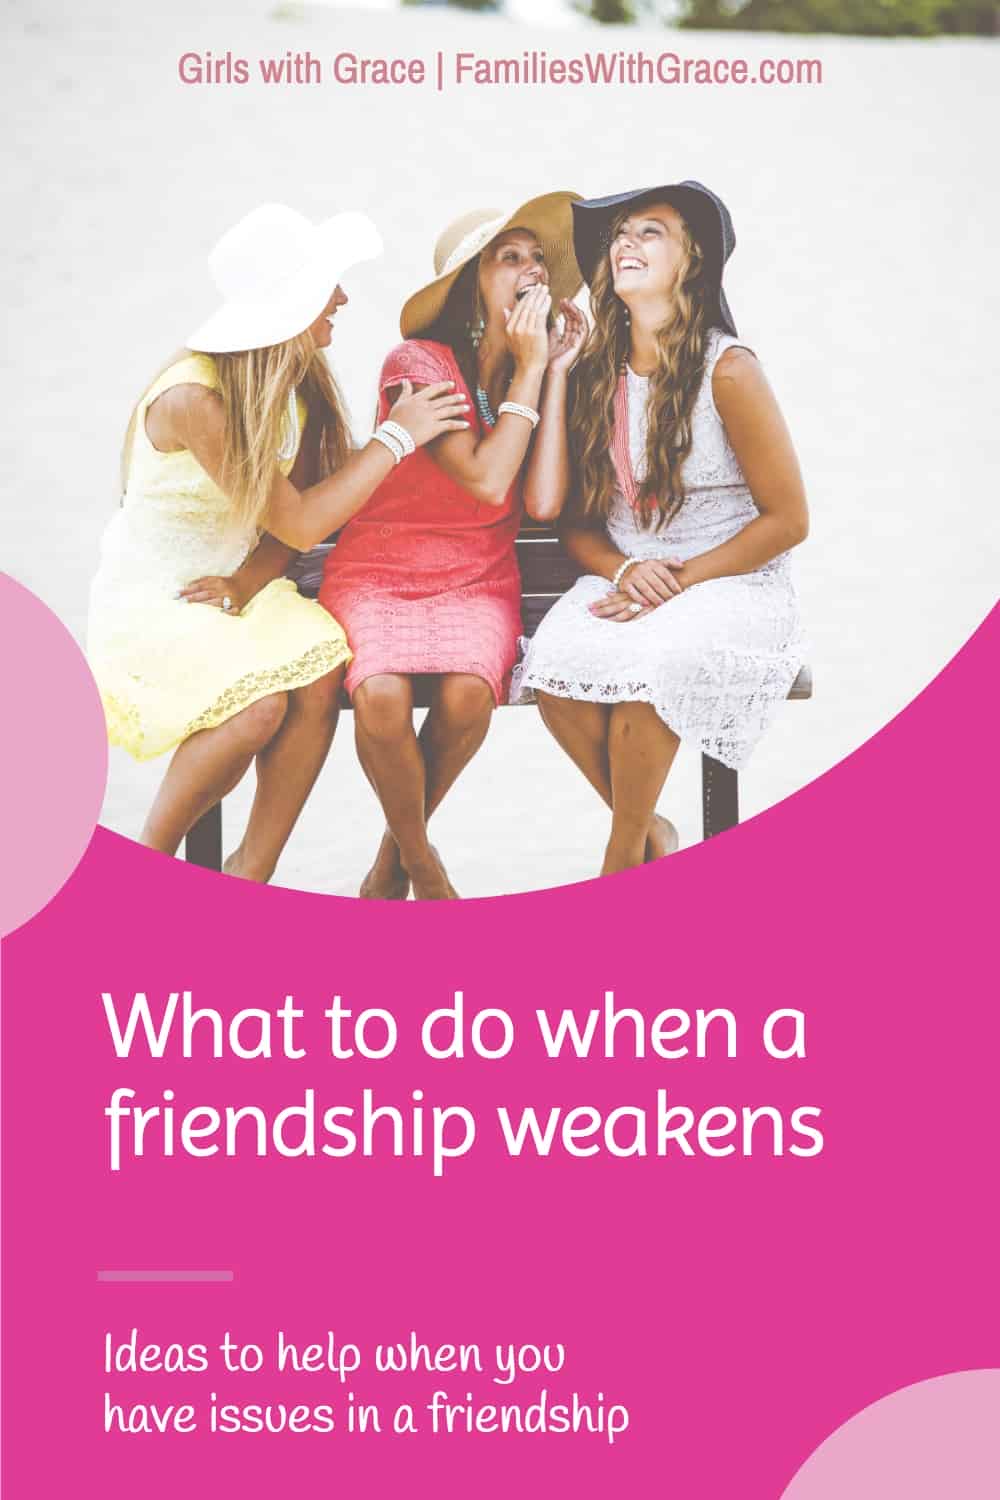 What to do when a friendship weakens